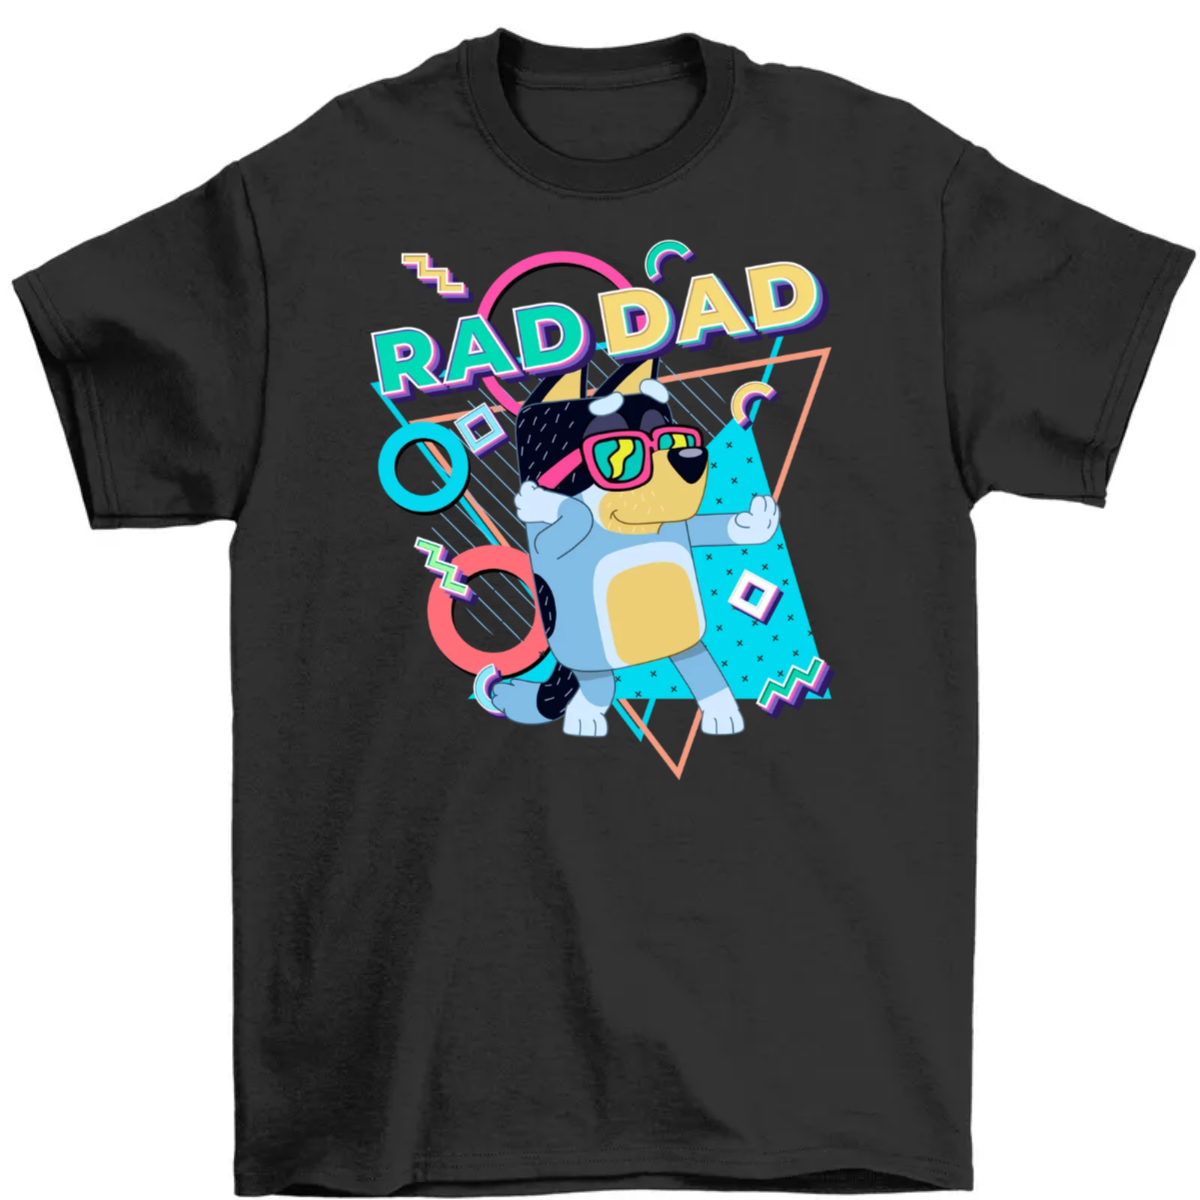 Rad Dad, Rad Dad's Wife - Gift For Dad - Personalized T Shirt